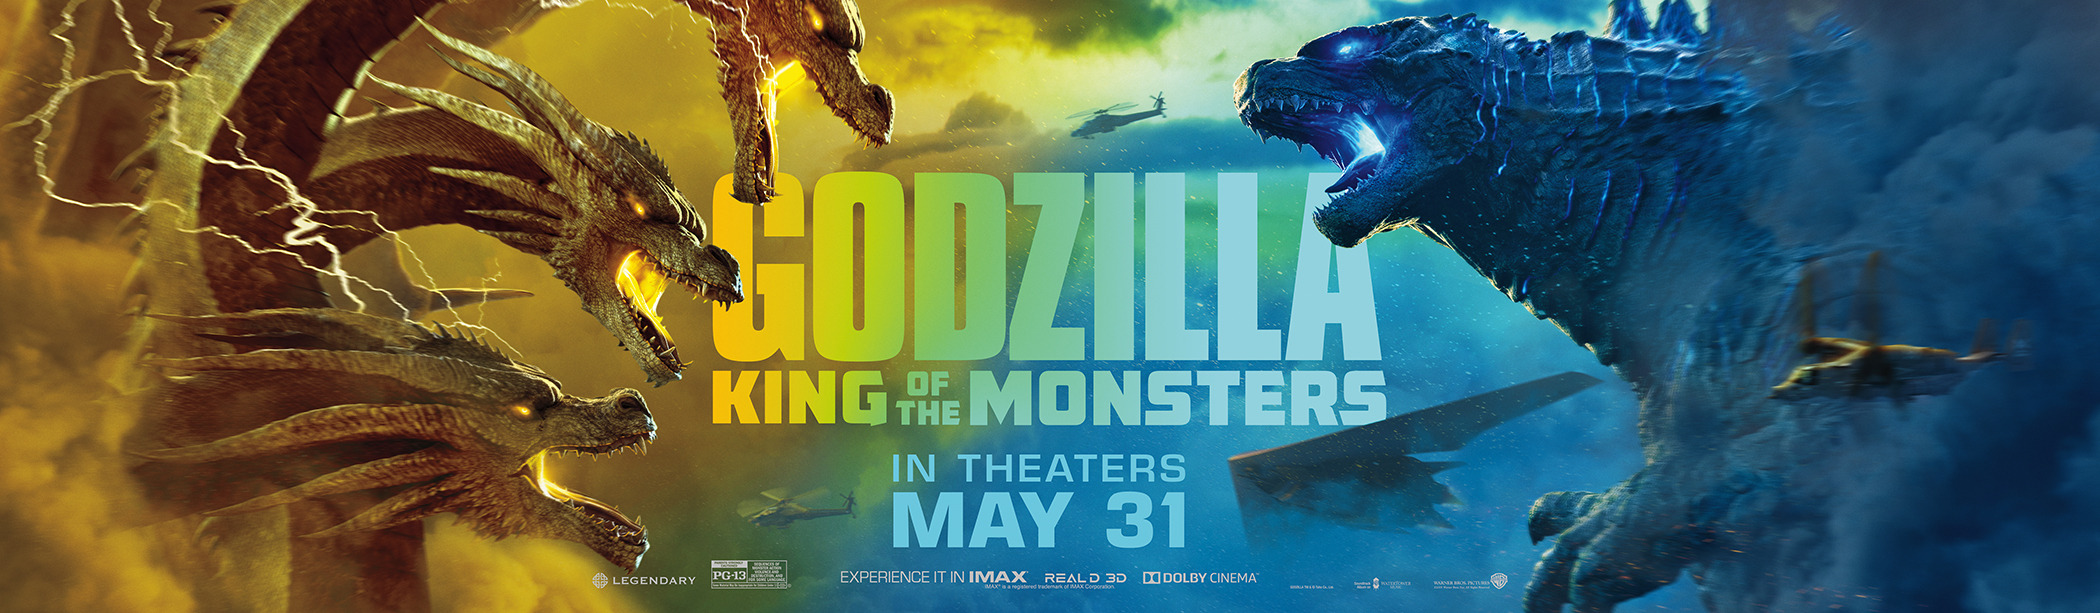 Mega Sized Movie Poster Image for Godzilla: King of the Monsters (#16 of 27)